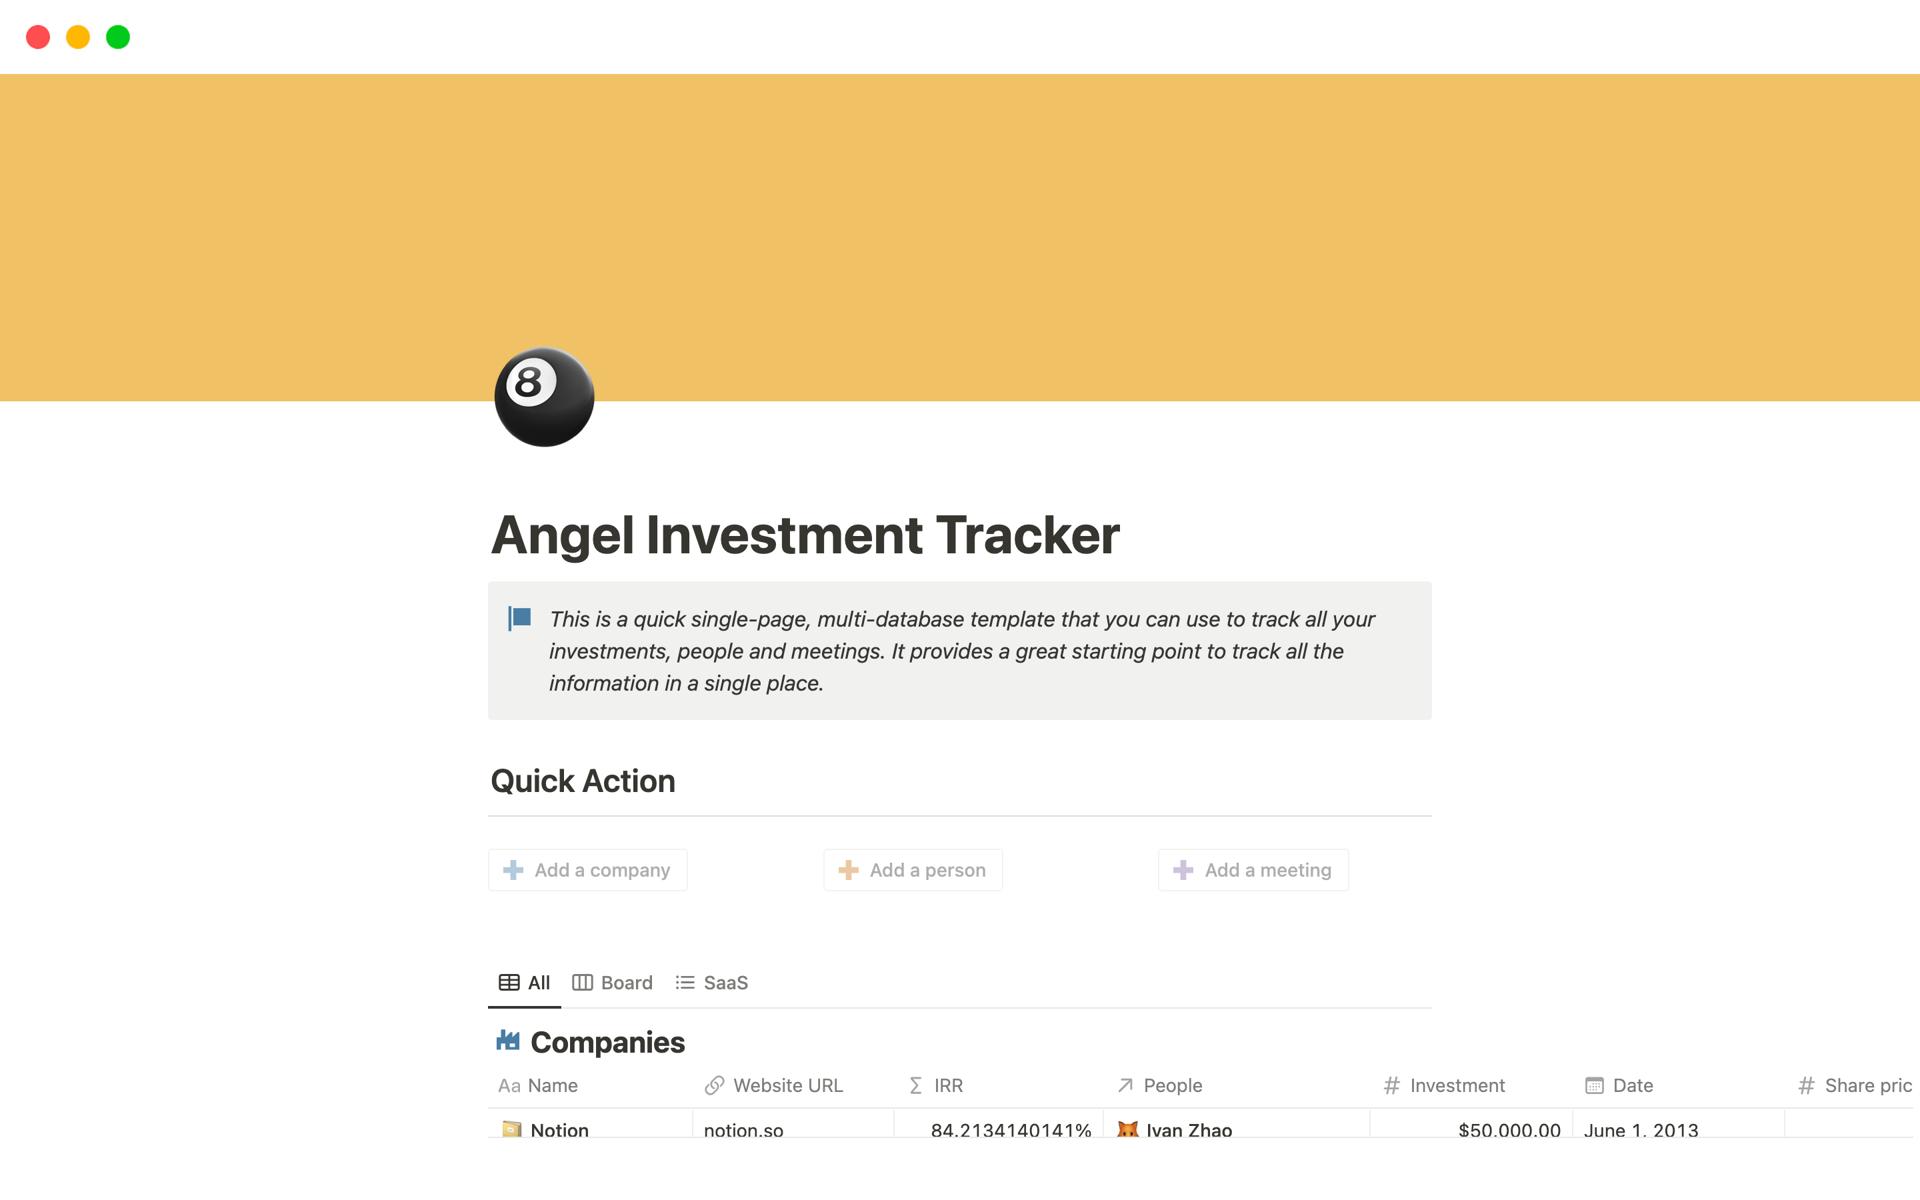 Quick single-page, multi-database template that you can use to track all your investments, people and meetings in one place.